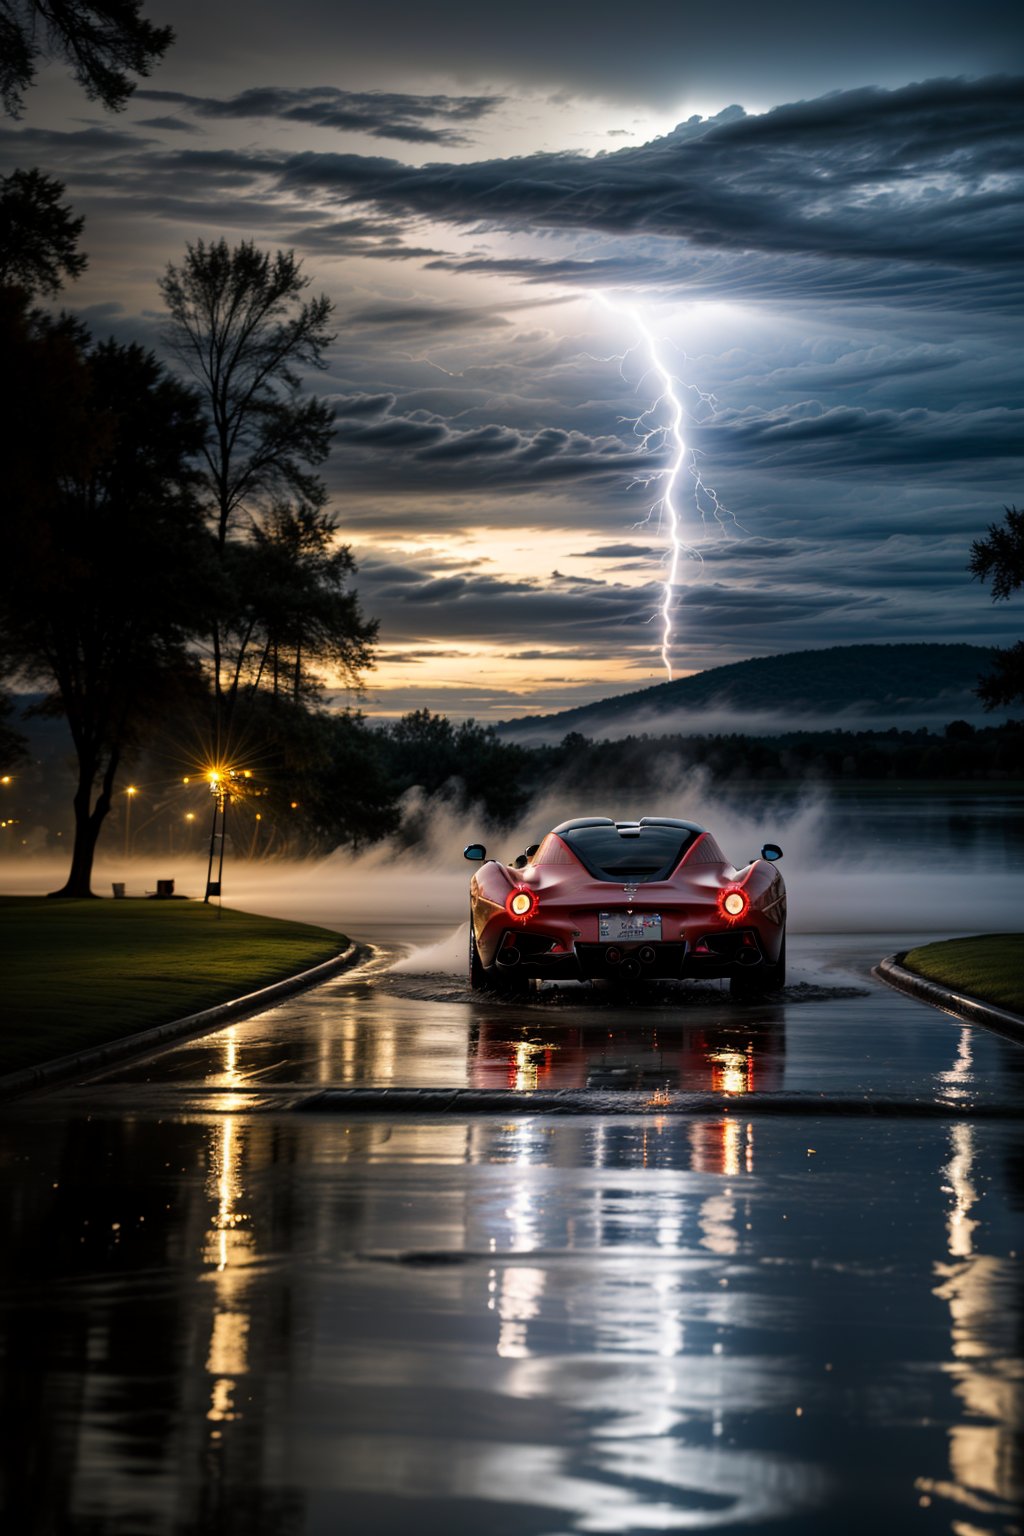 A high-speed shot of the sleek Ferrari LaFerrari coupé, blurred motion capturing its velocity as it zooms towards the camera. Amidst the pre-storm darkness, a mesmerizing display of water particles swirl around the vehicle, illuminated by subtle lightning flashes. The background is an eerie, misty lake with towering trees and dense fog, reflecting the car's sleek design. ((A LOT of water particles)) dance in the air, creating a dynamic composition that immerses the viewer.